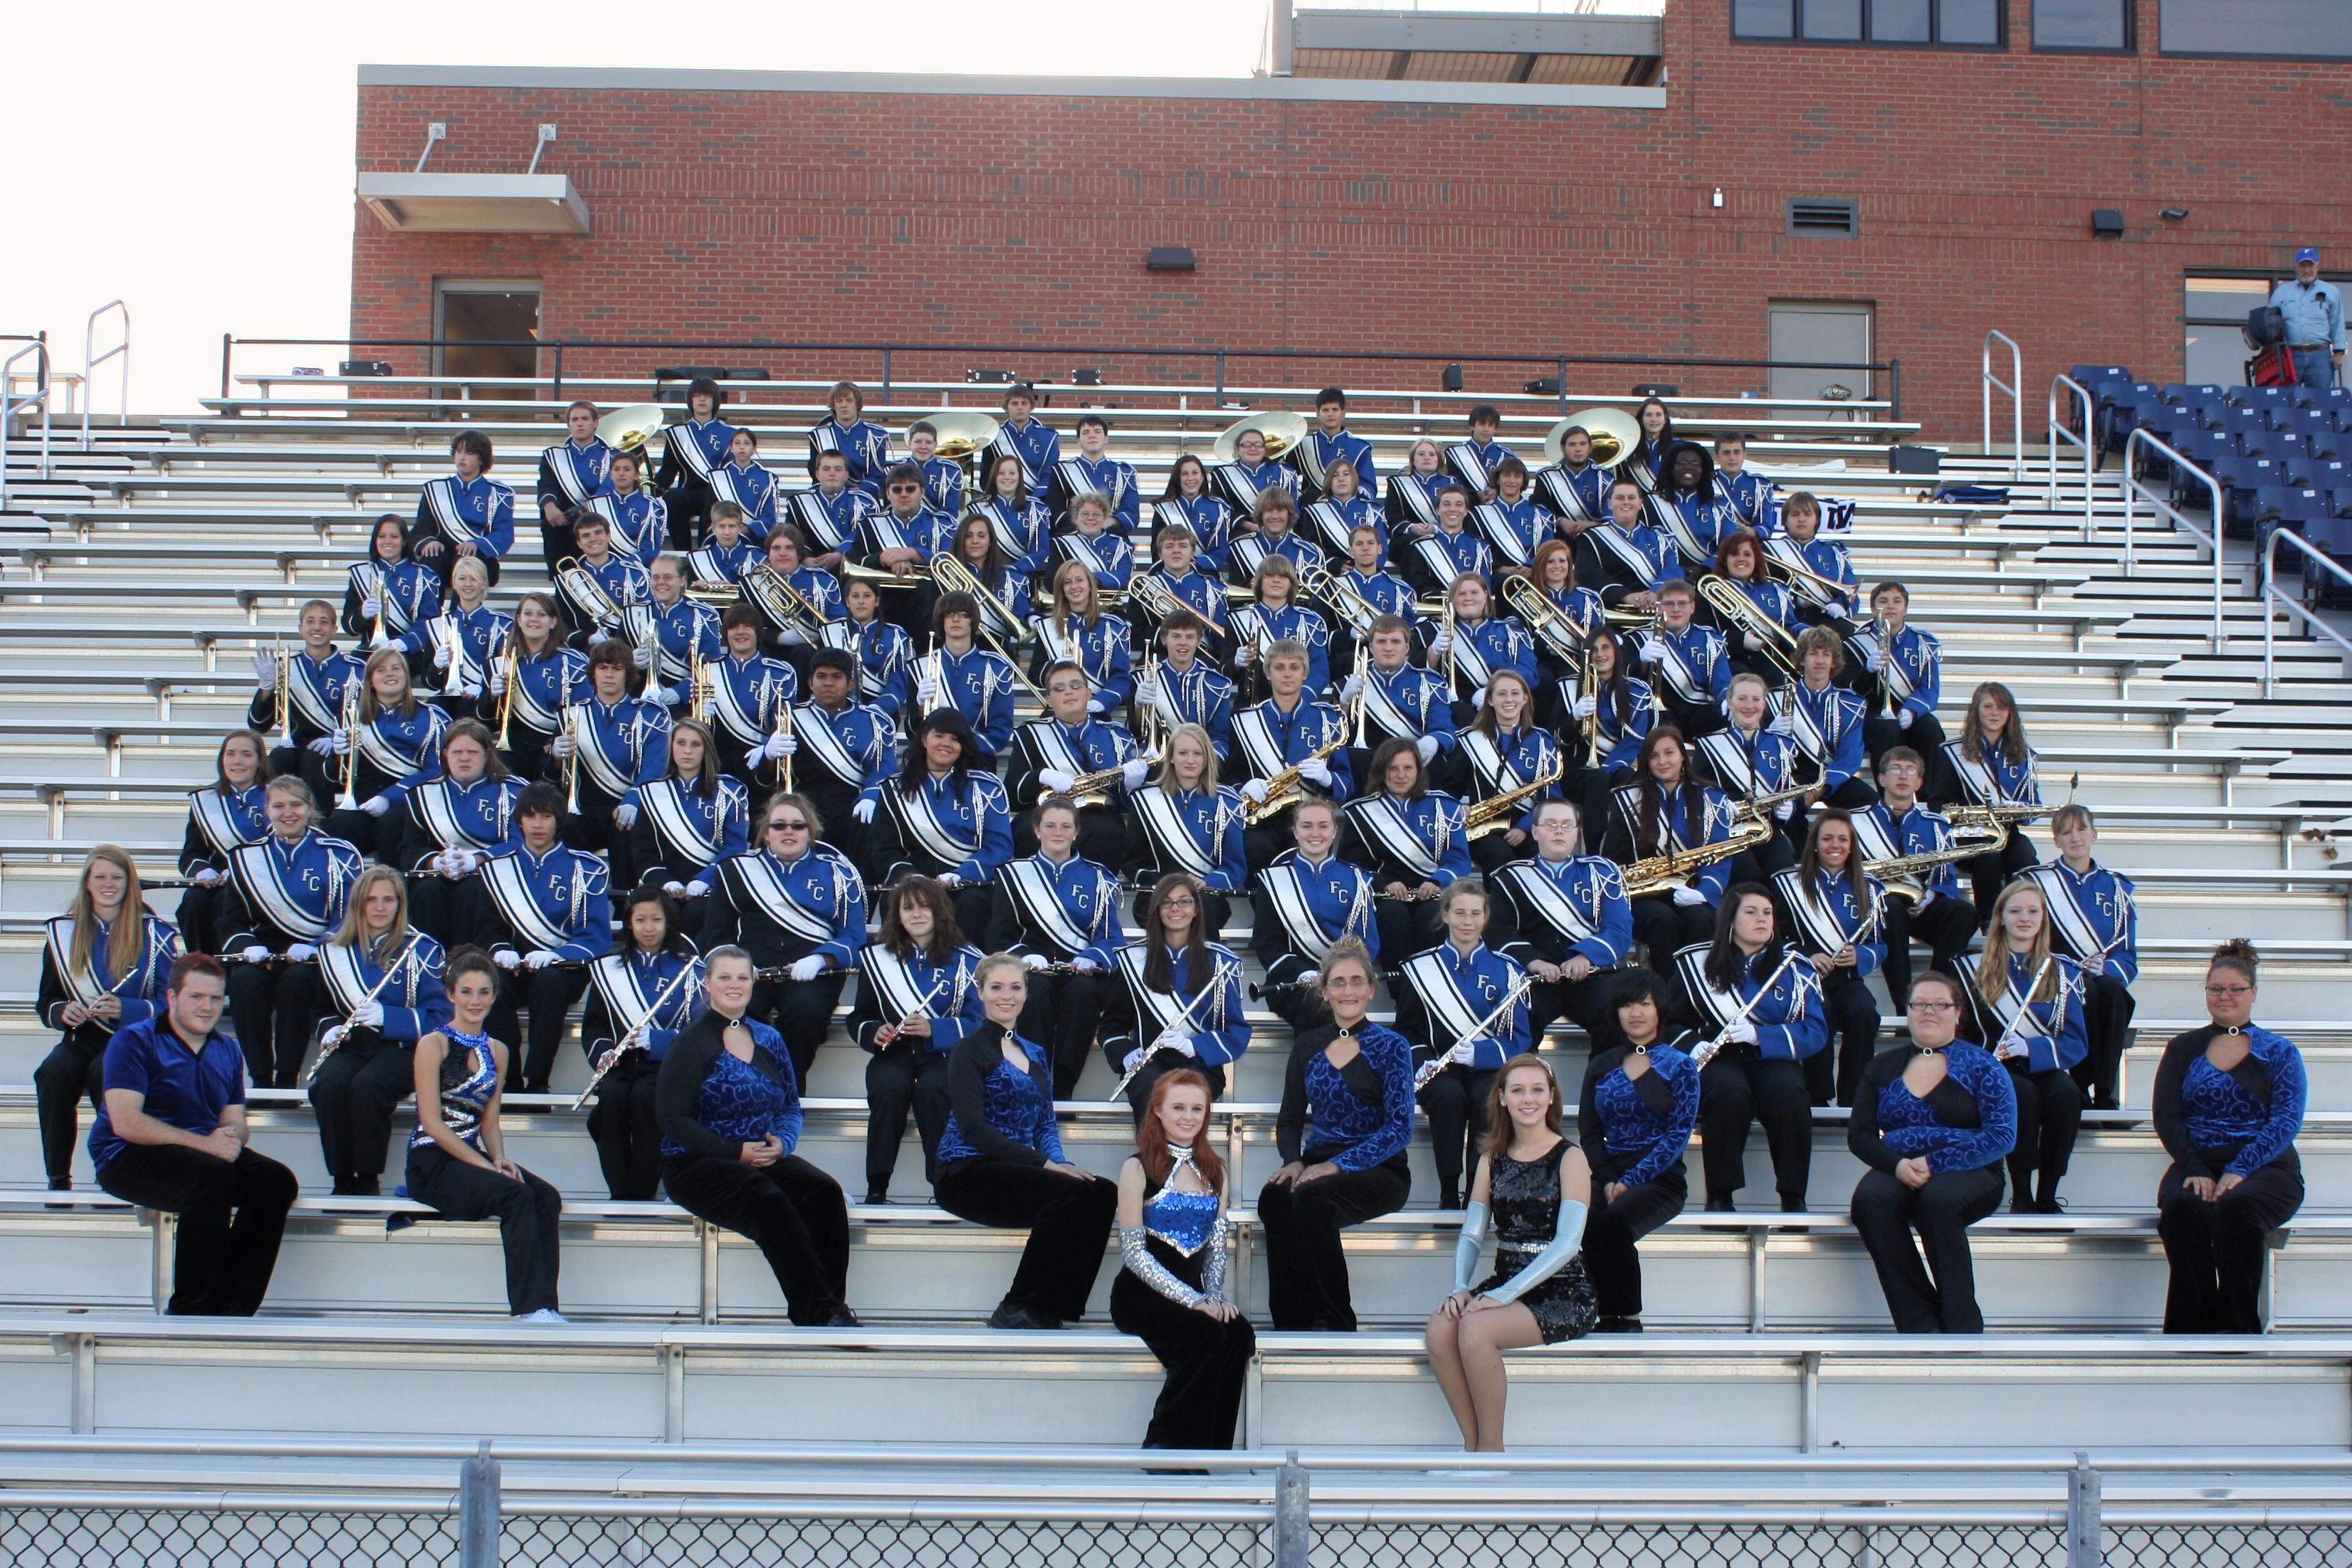 Download FCHS Band 2010-11 (3304Wx2203H)